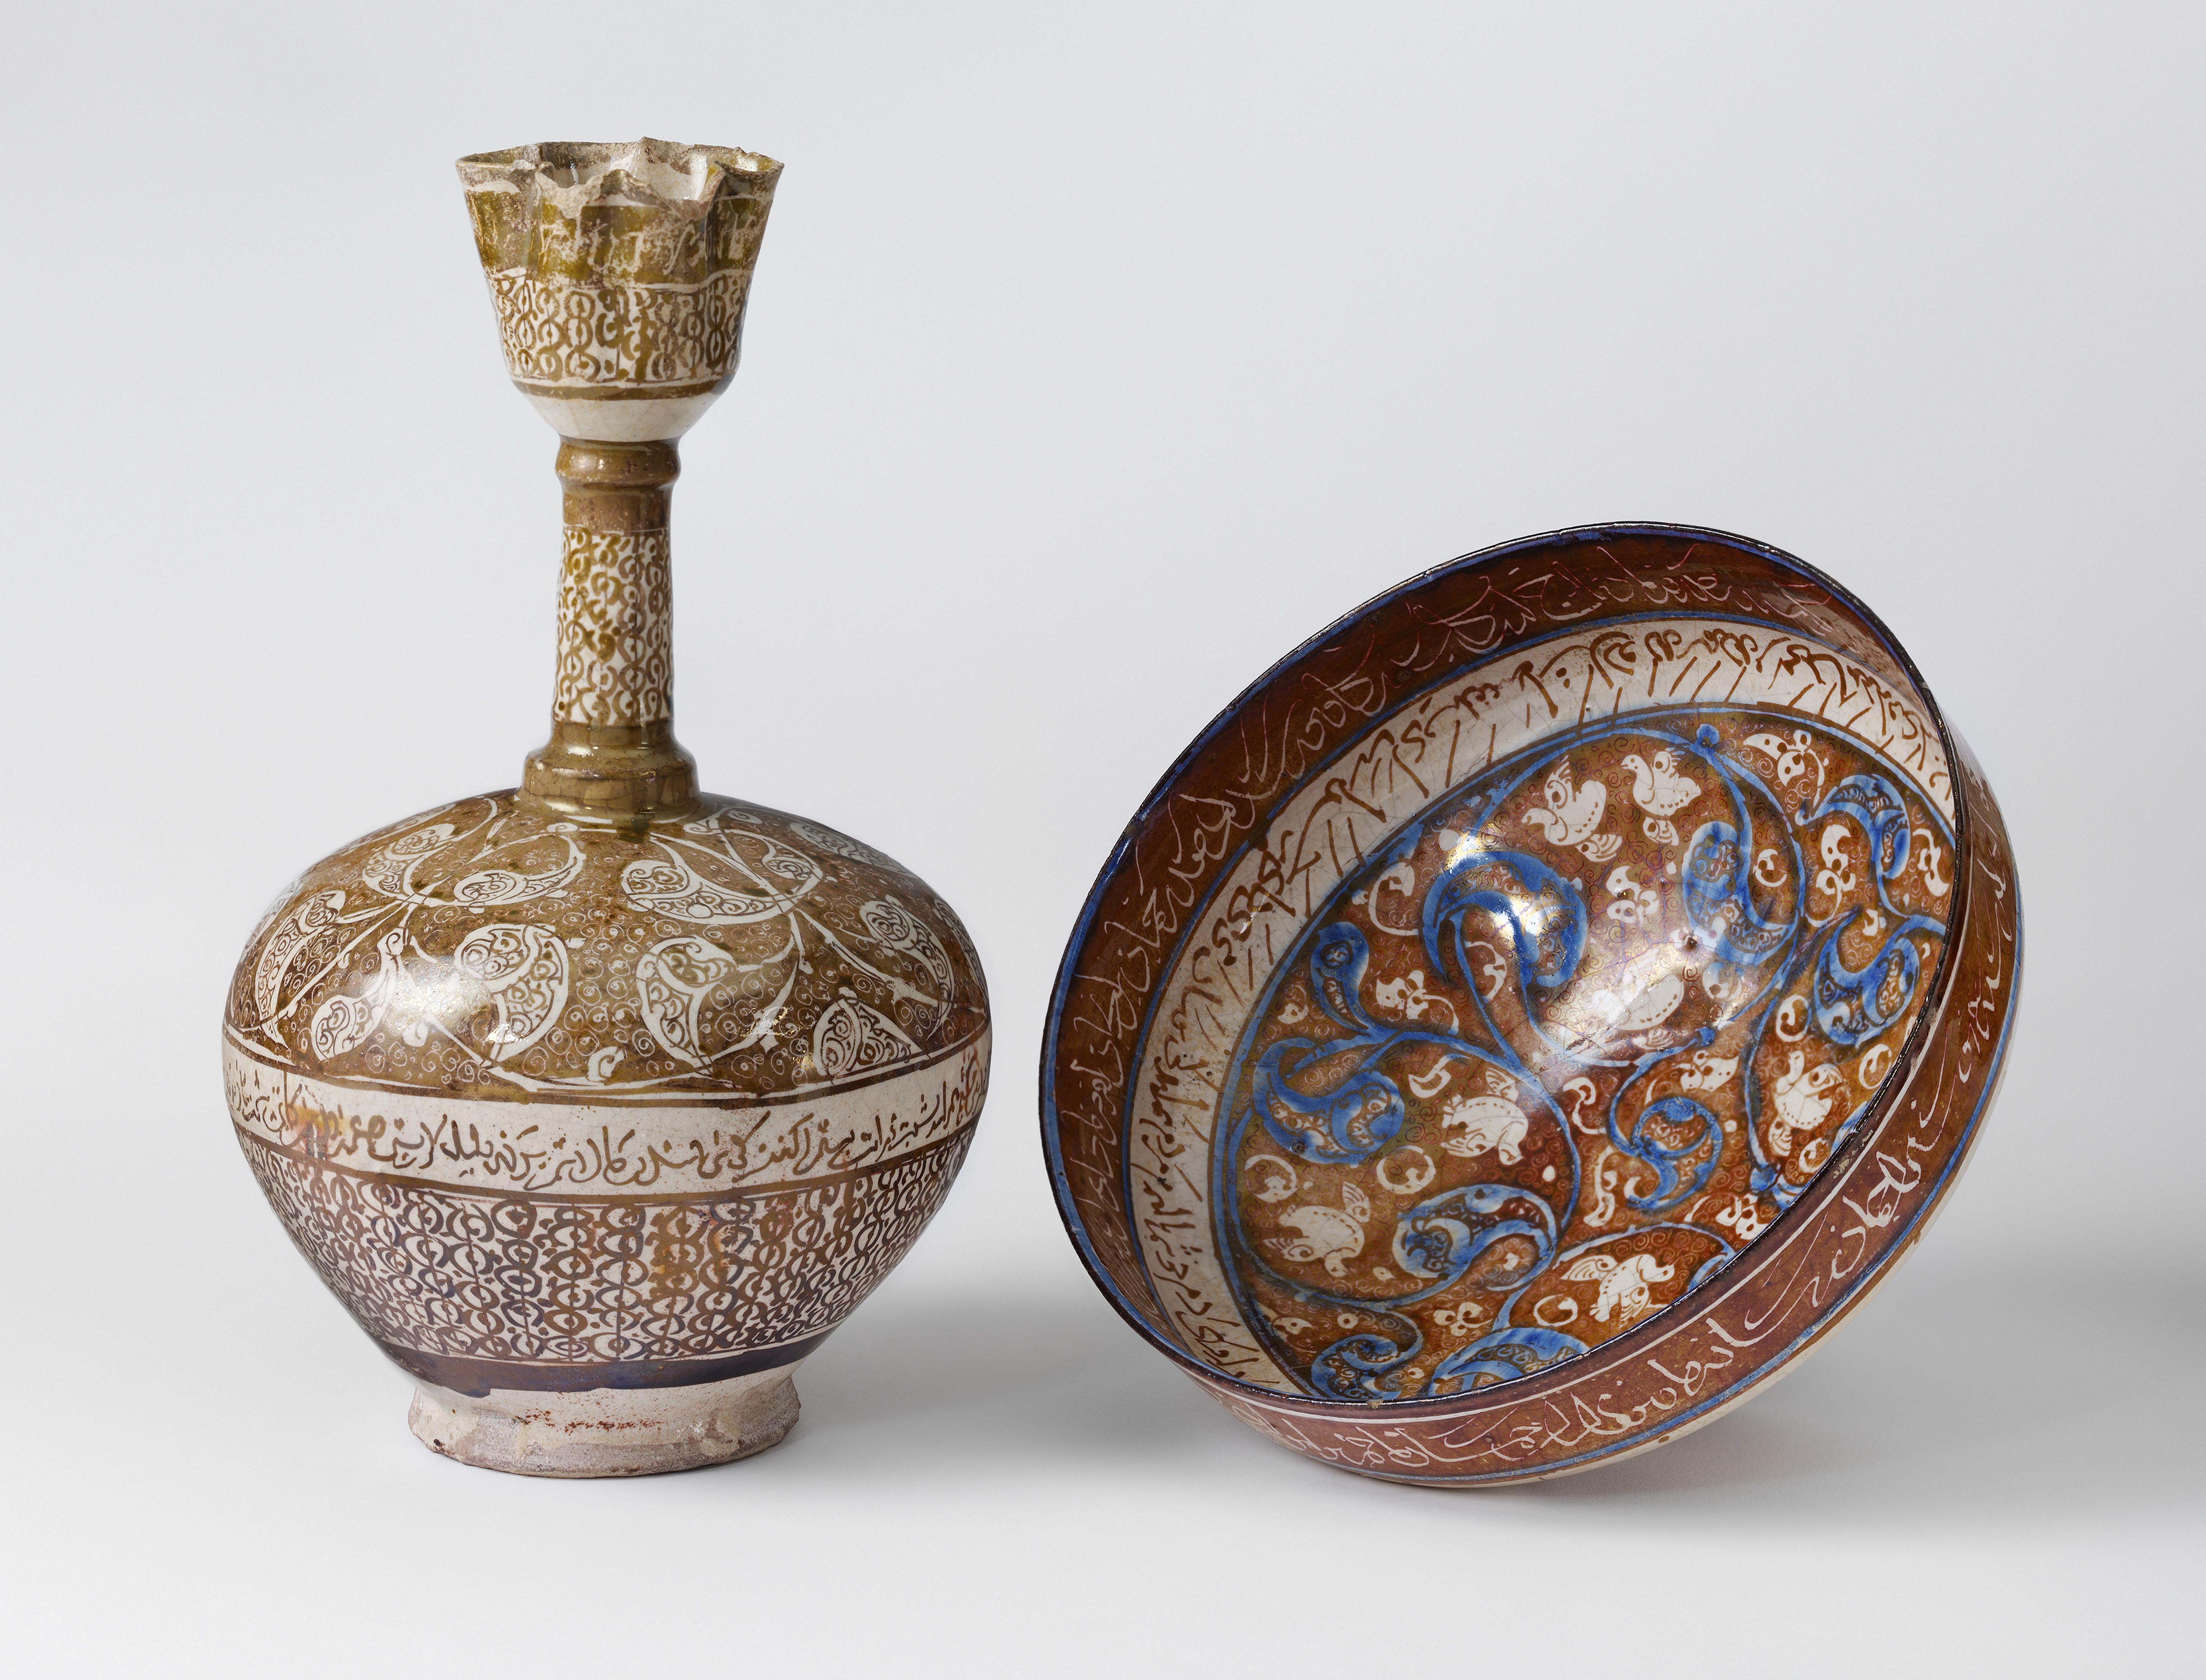 Bottle and bowl in poetry in Persian, 1180-1220 (c) Victoria and Albert Museum, London